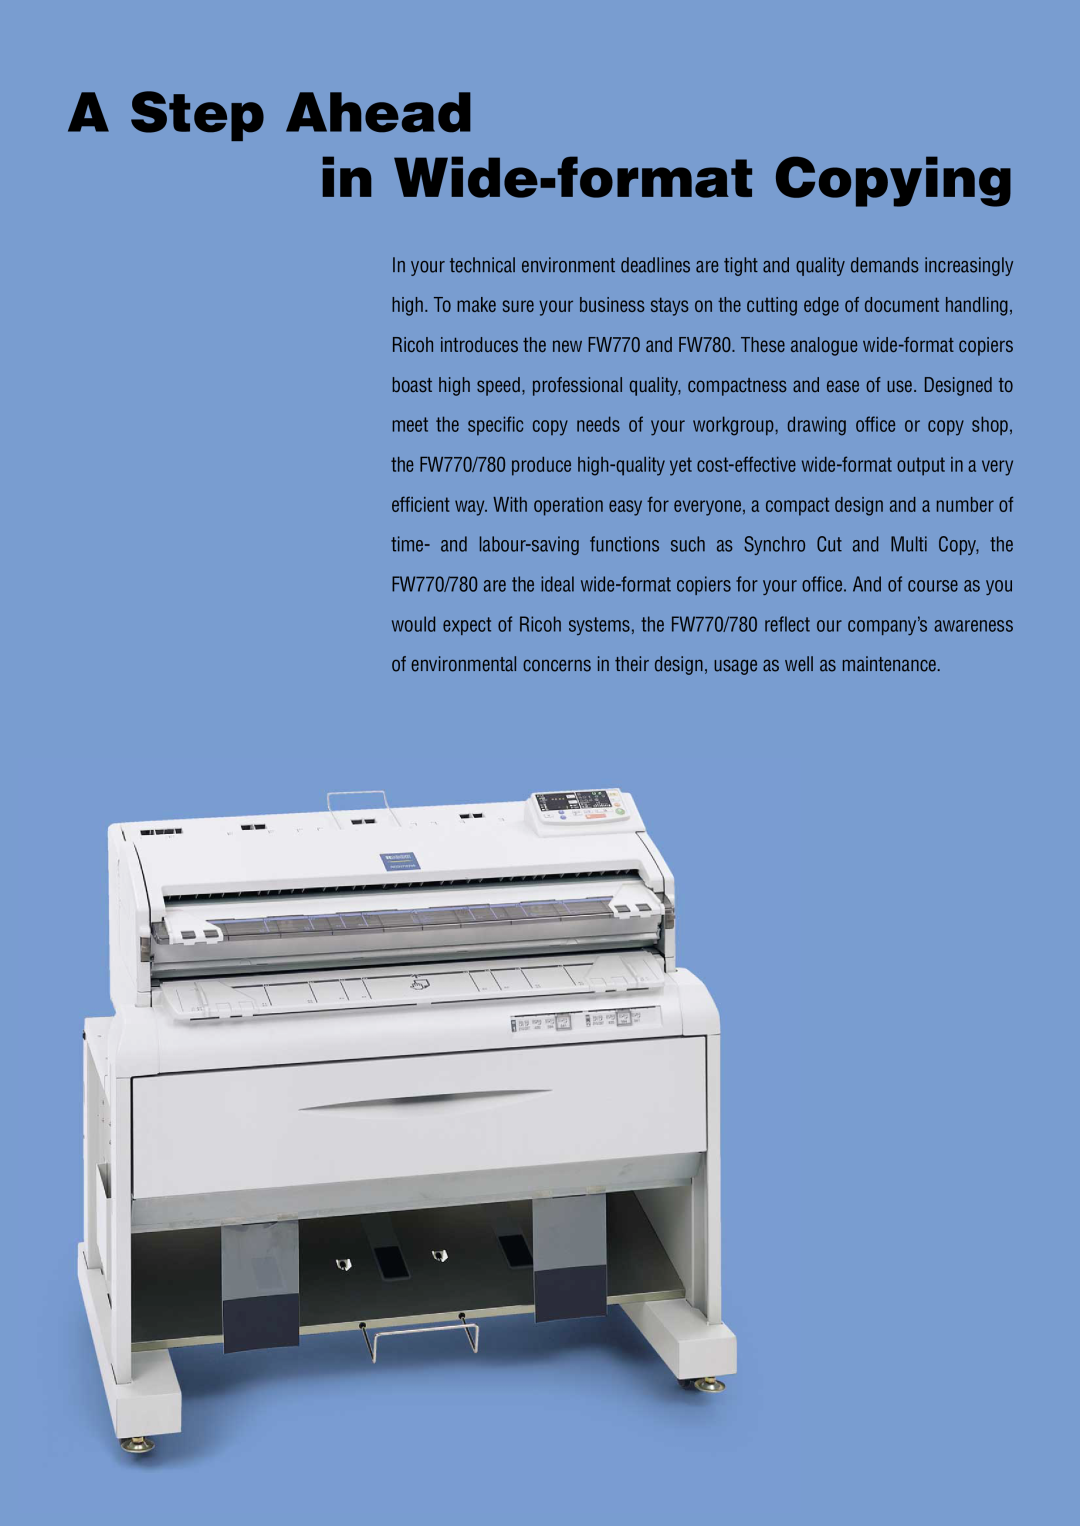 Ricoh FW770, FW780 manual A Step Ahead in Wide-format Copying 